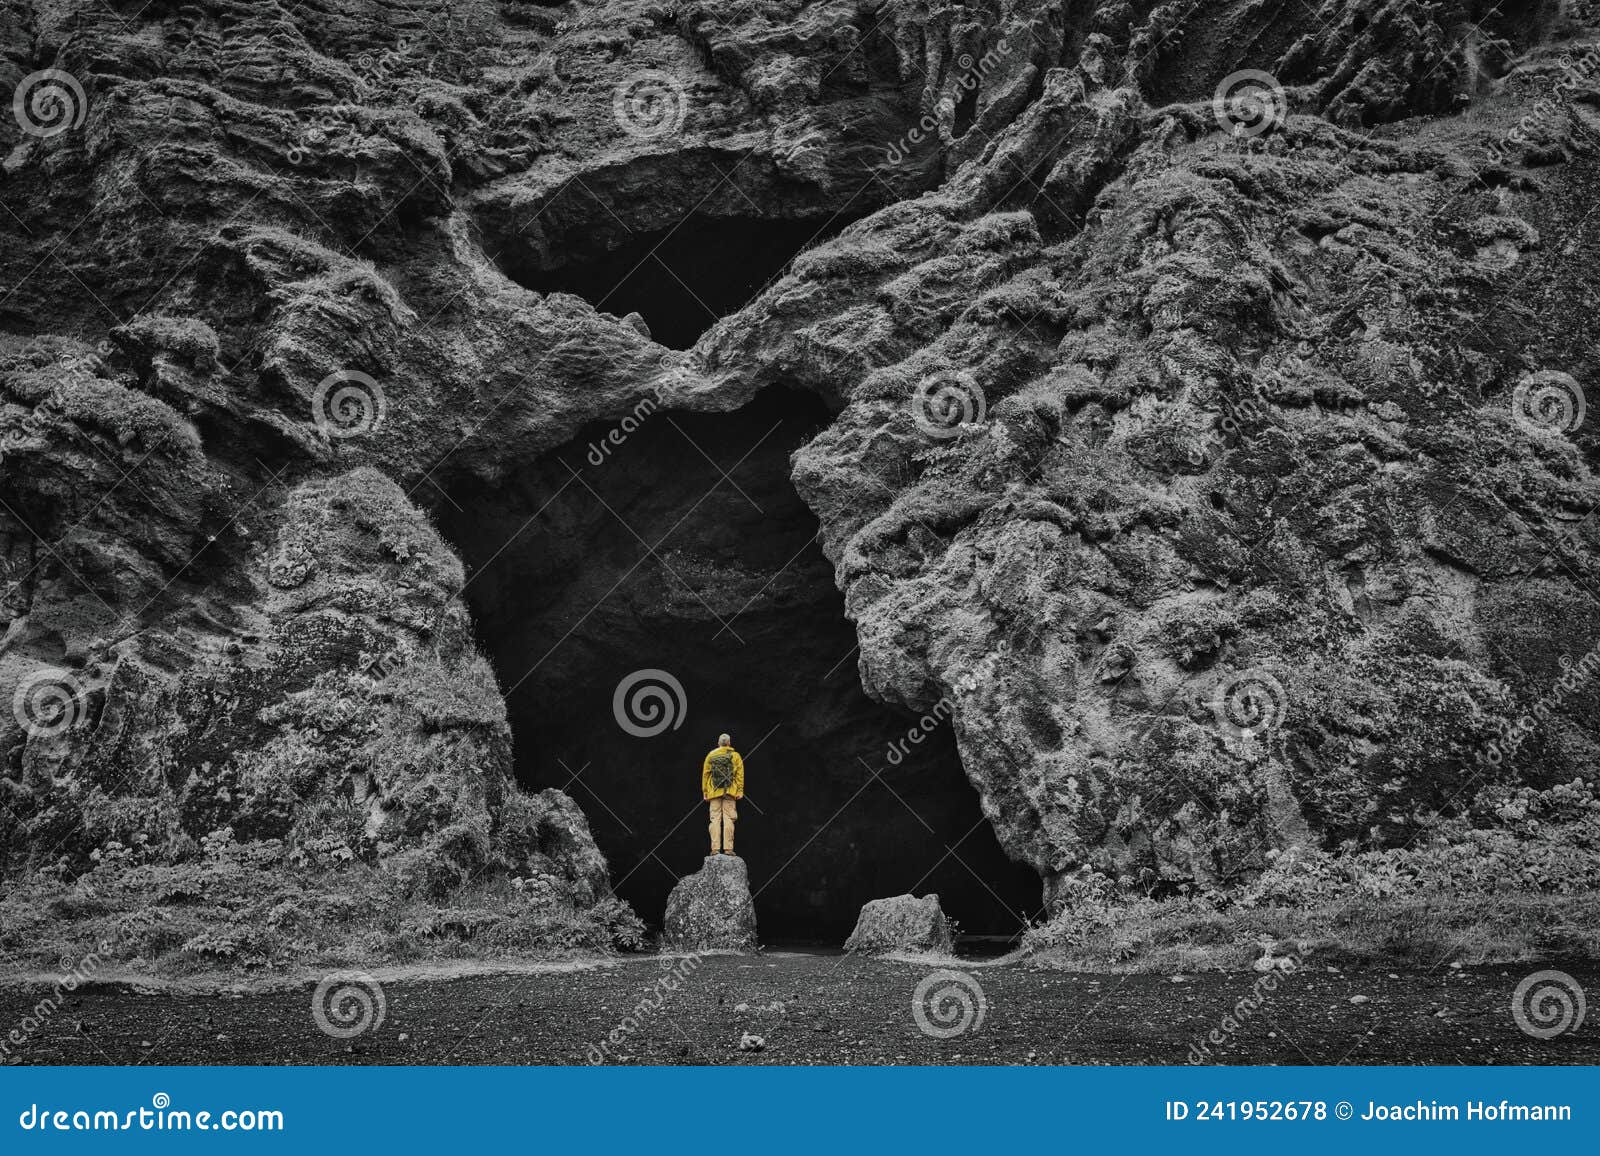 yoda cave at hjorleifshofdi in iceland, black and white, adventurer with yellow raincoat